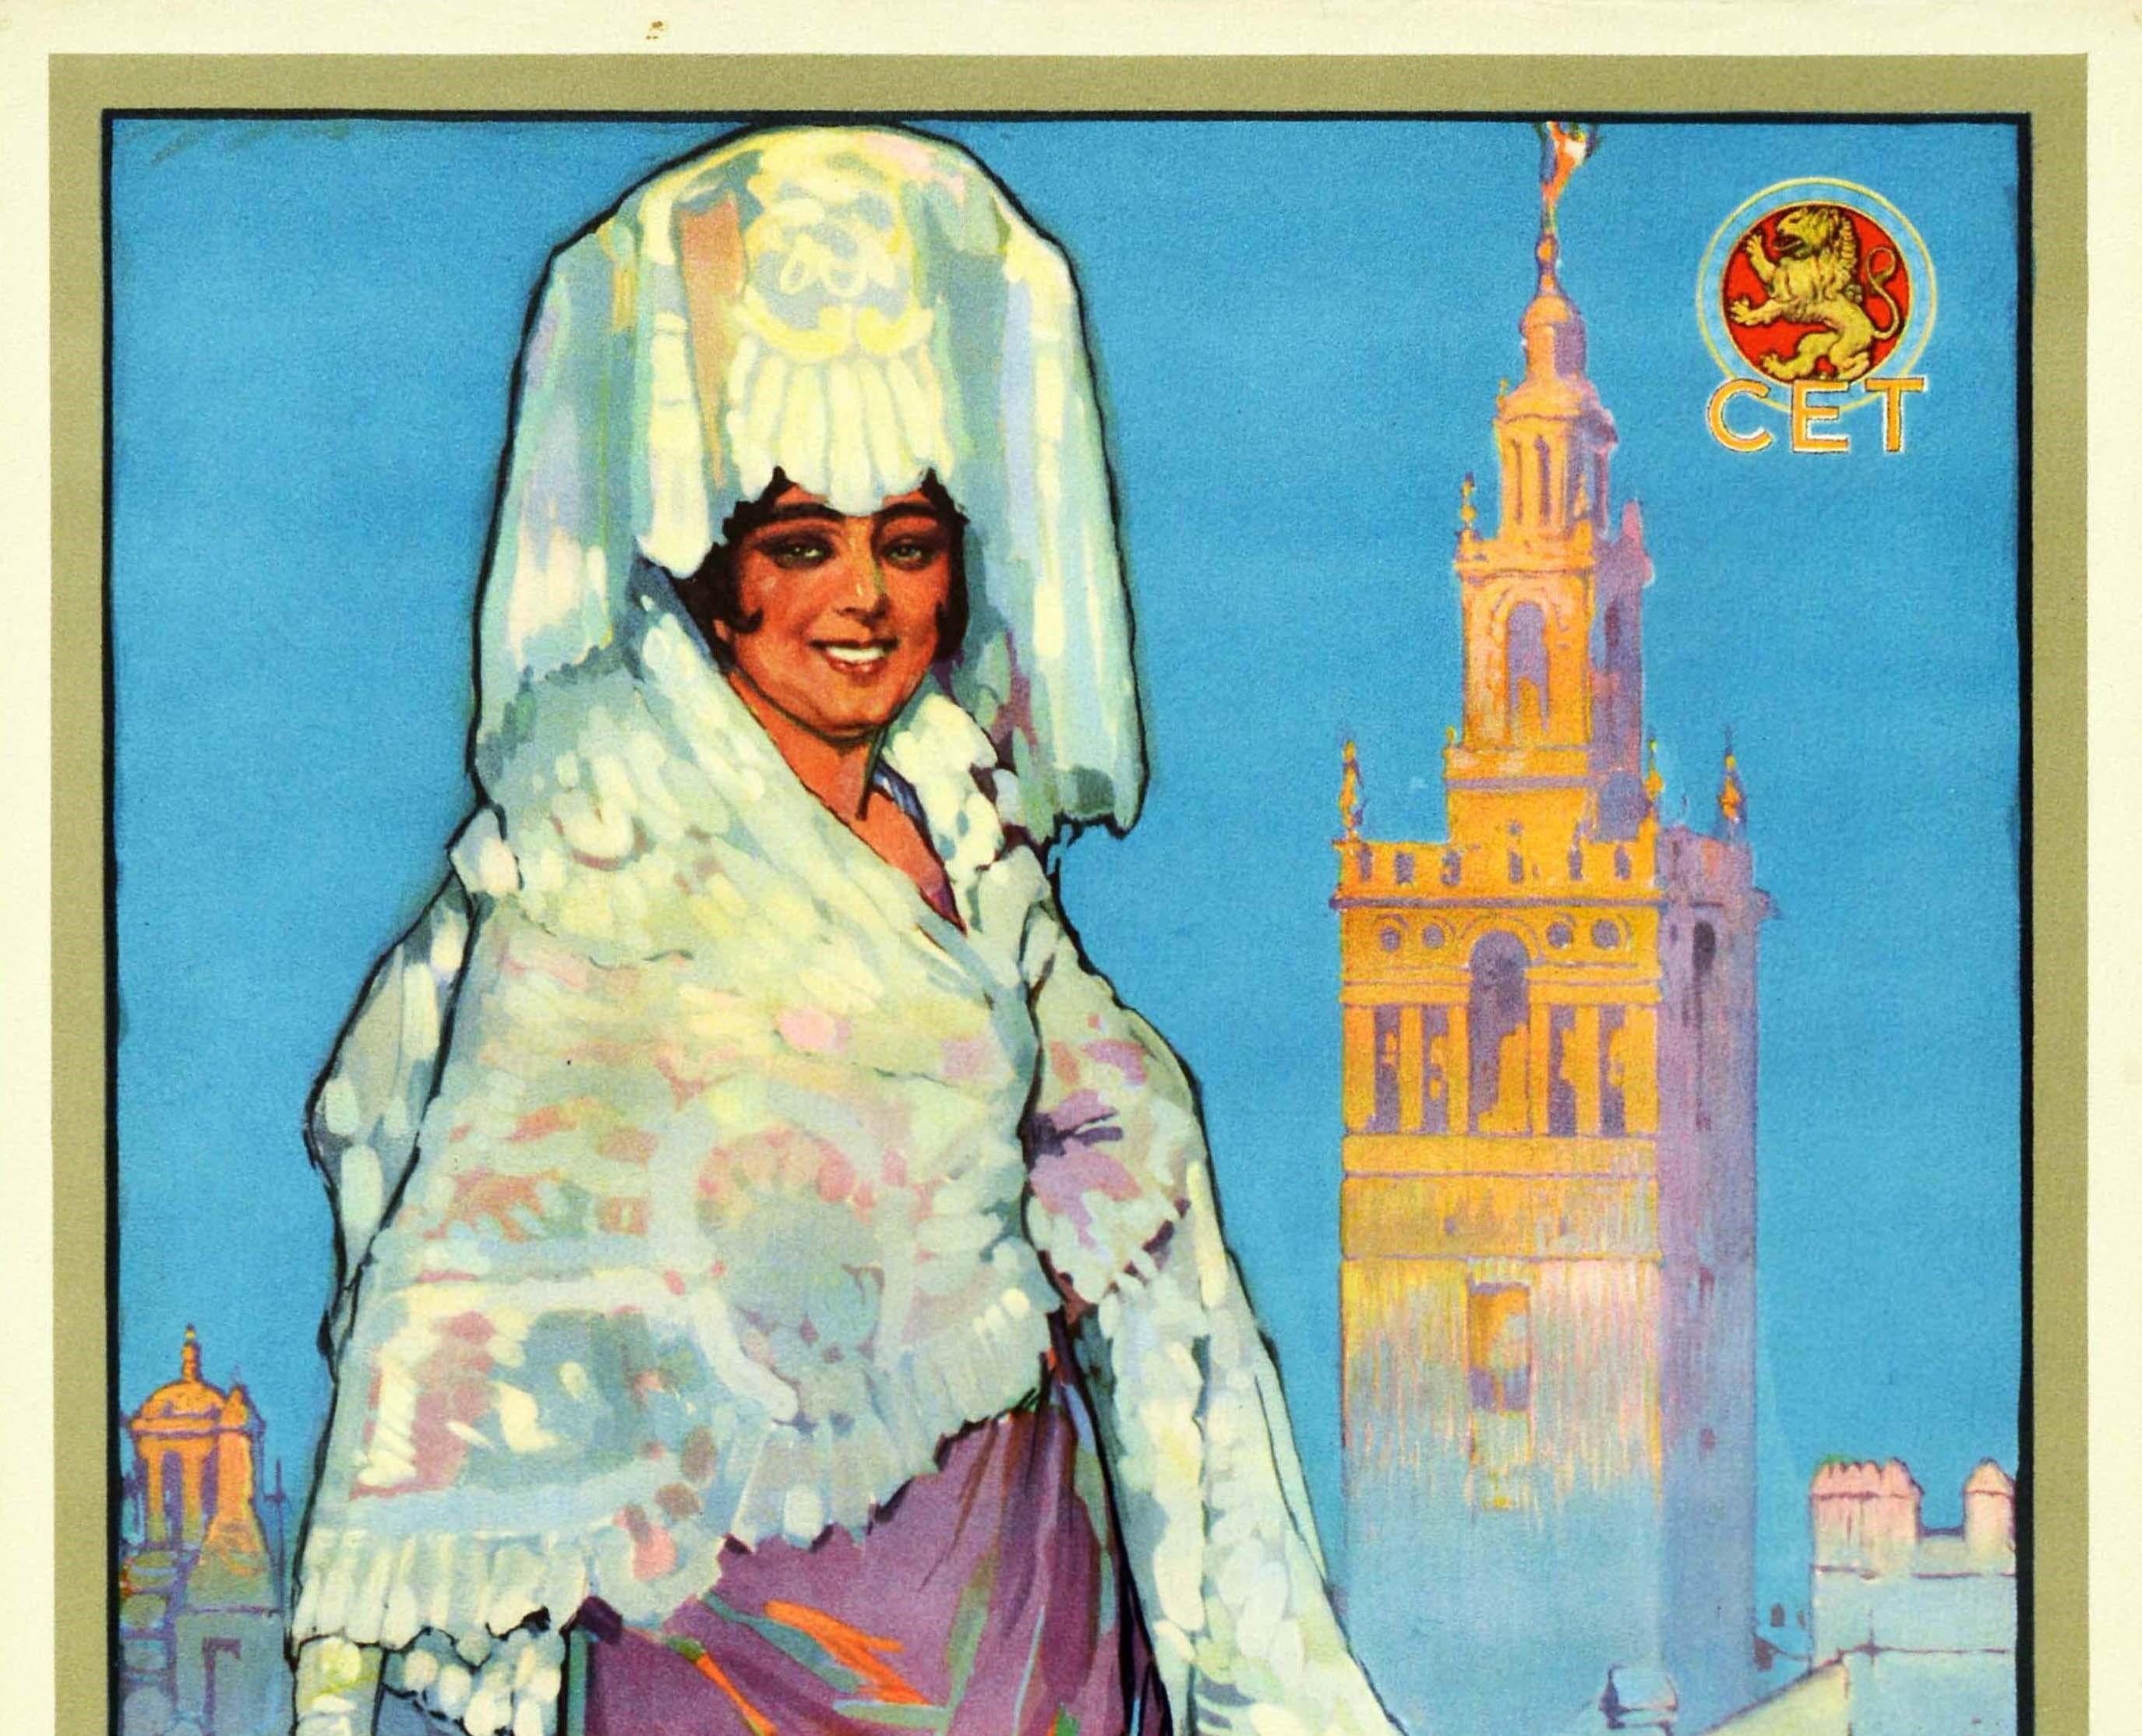 Original vintage travel poster - Visitad Sevilla la Perle de Andalucia / Visit Seville the Pearl of Andalusia - featuring colourful artwork by Jose Segrelles (1885-1969) of a smiling lady in traditional dress looking at the viewer in front of